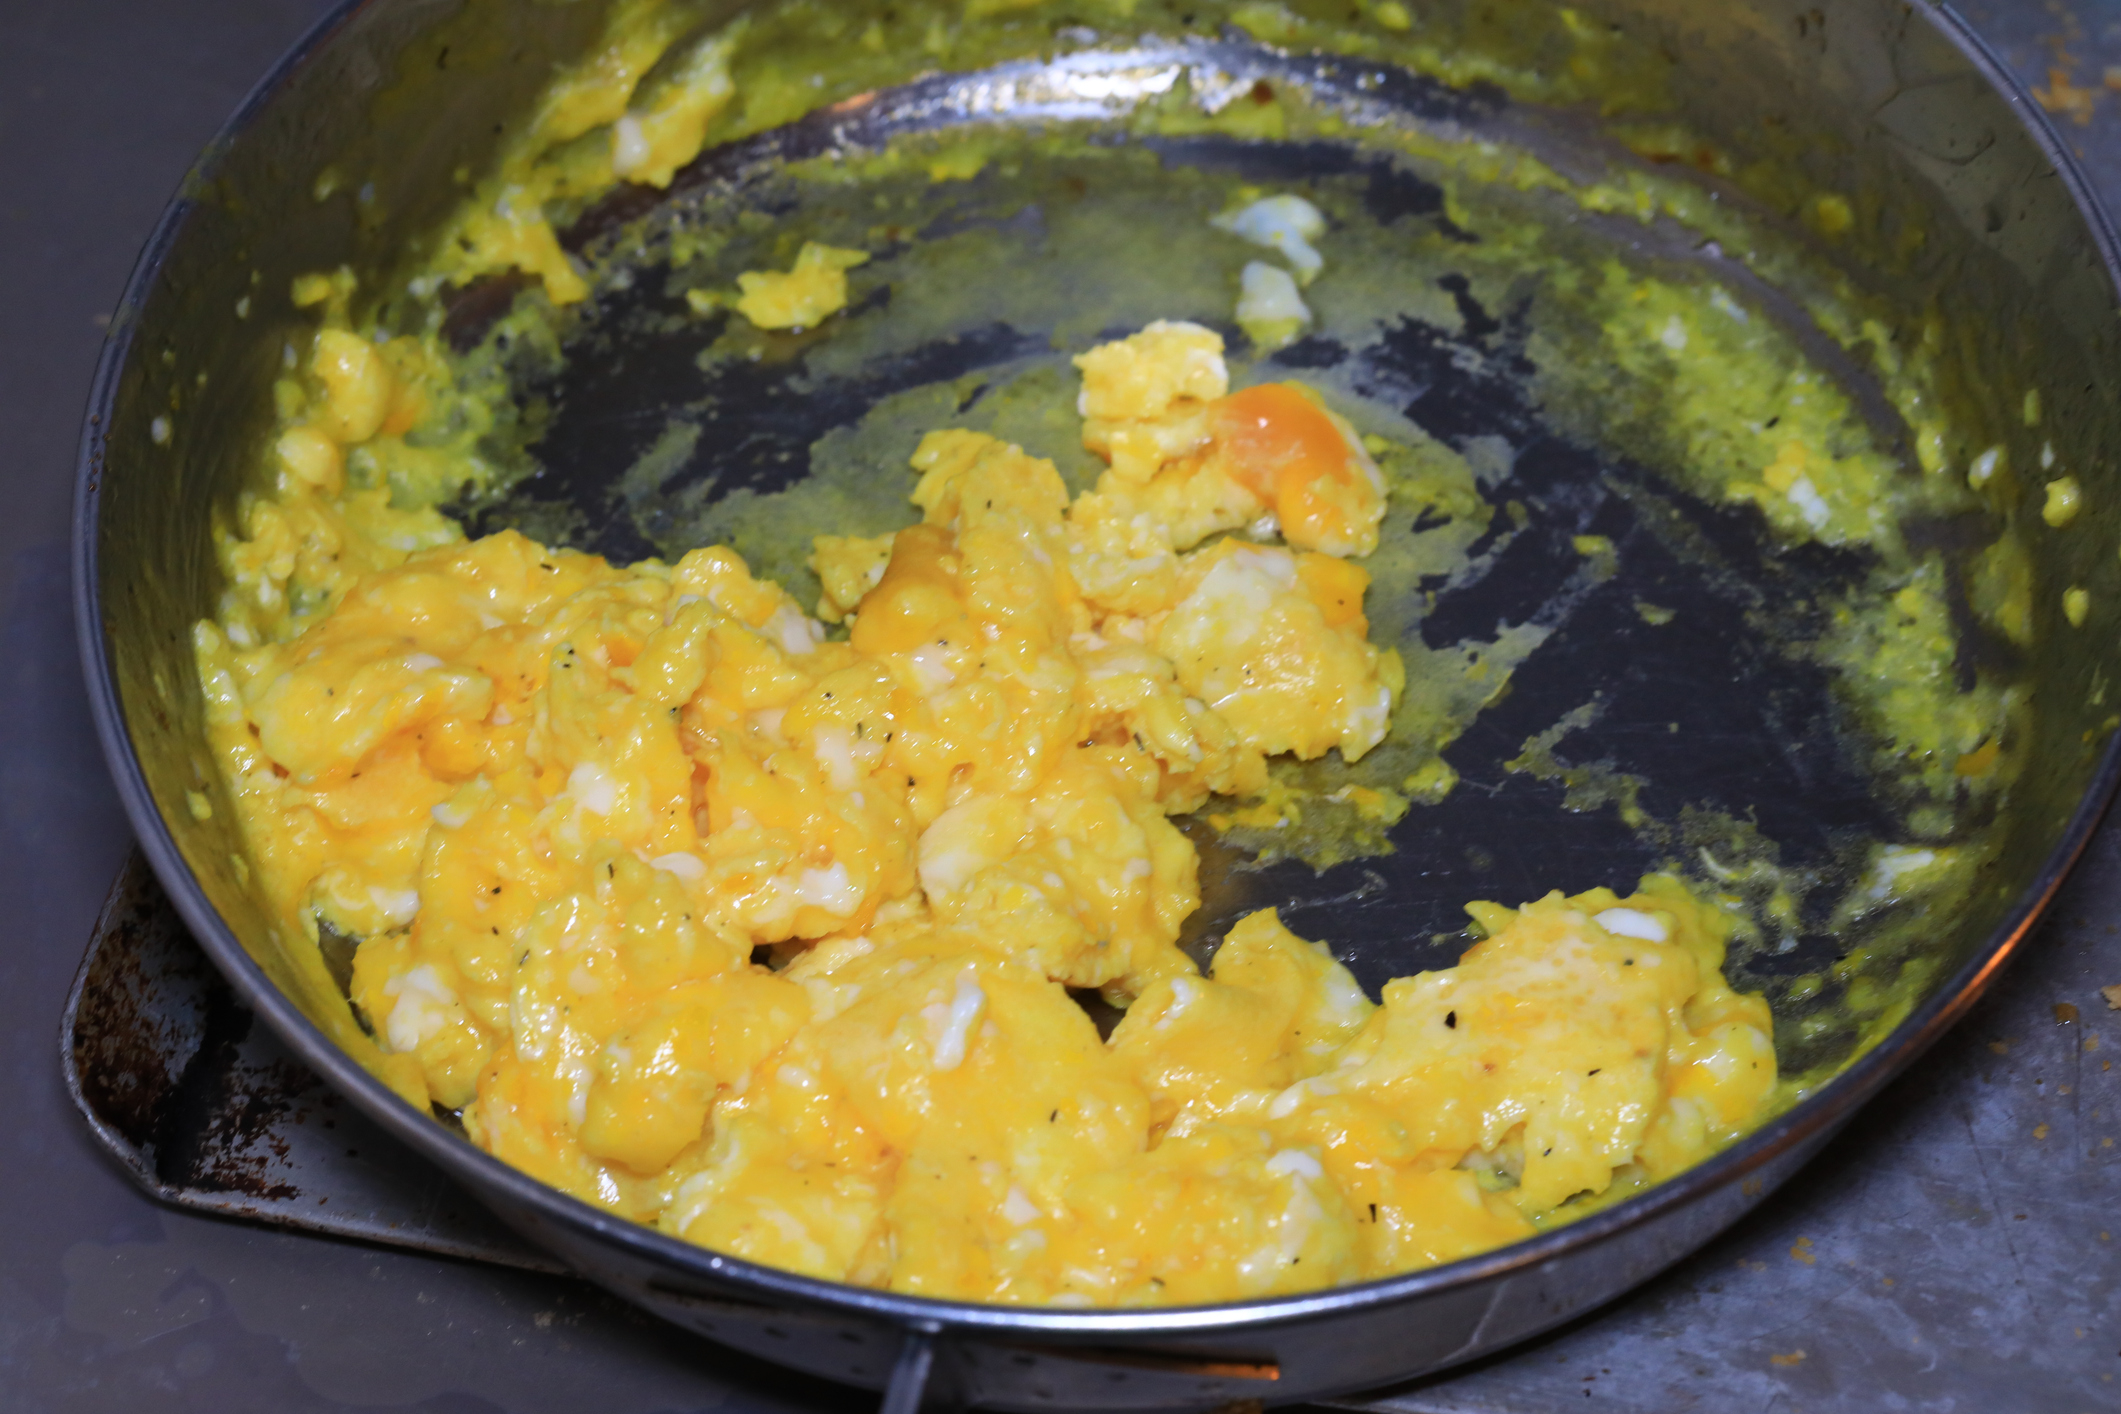 Scrambled eggs in a black skillet with some sticking to the pan